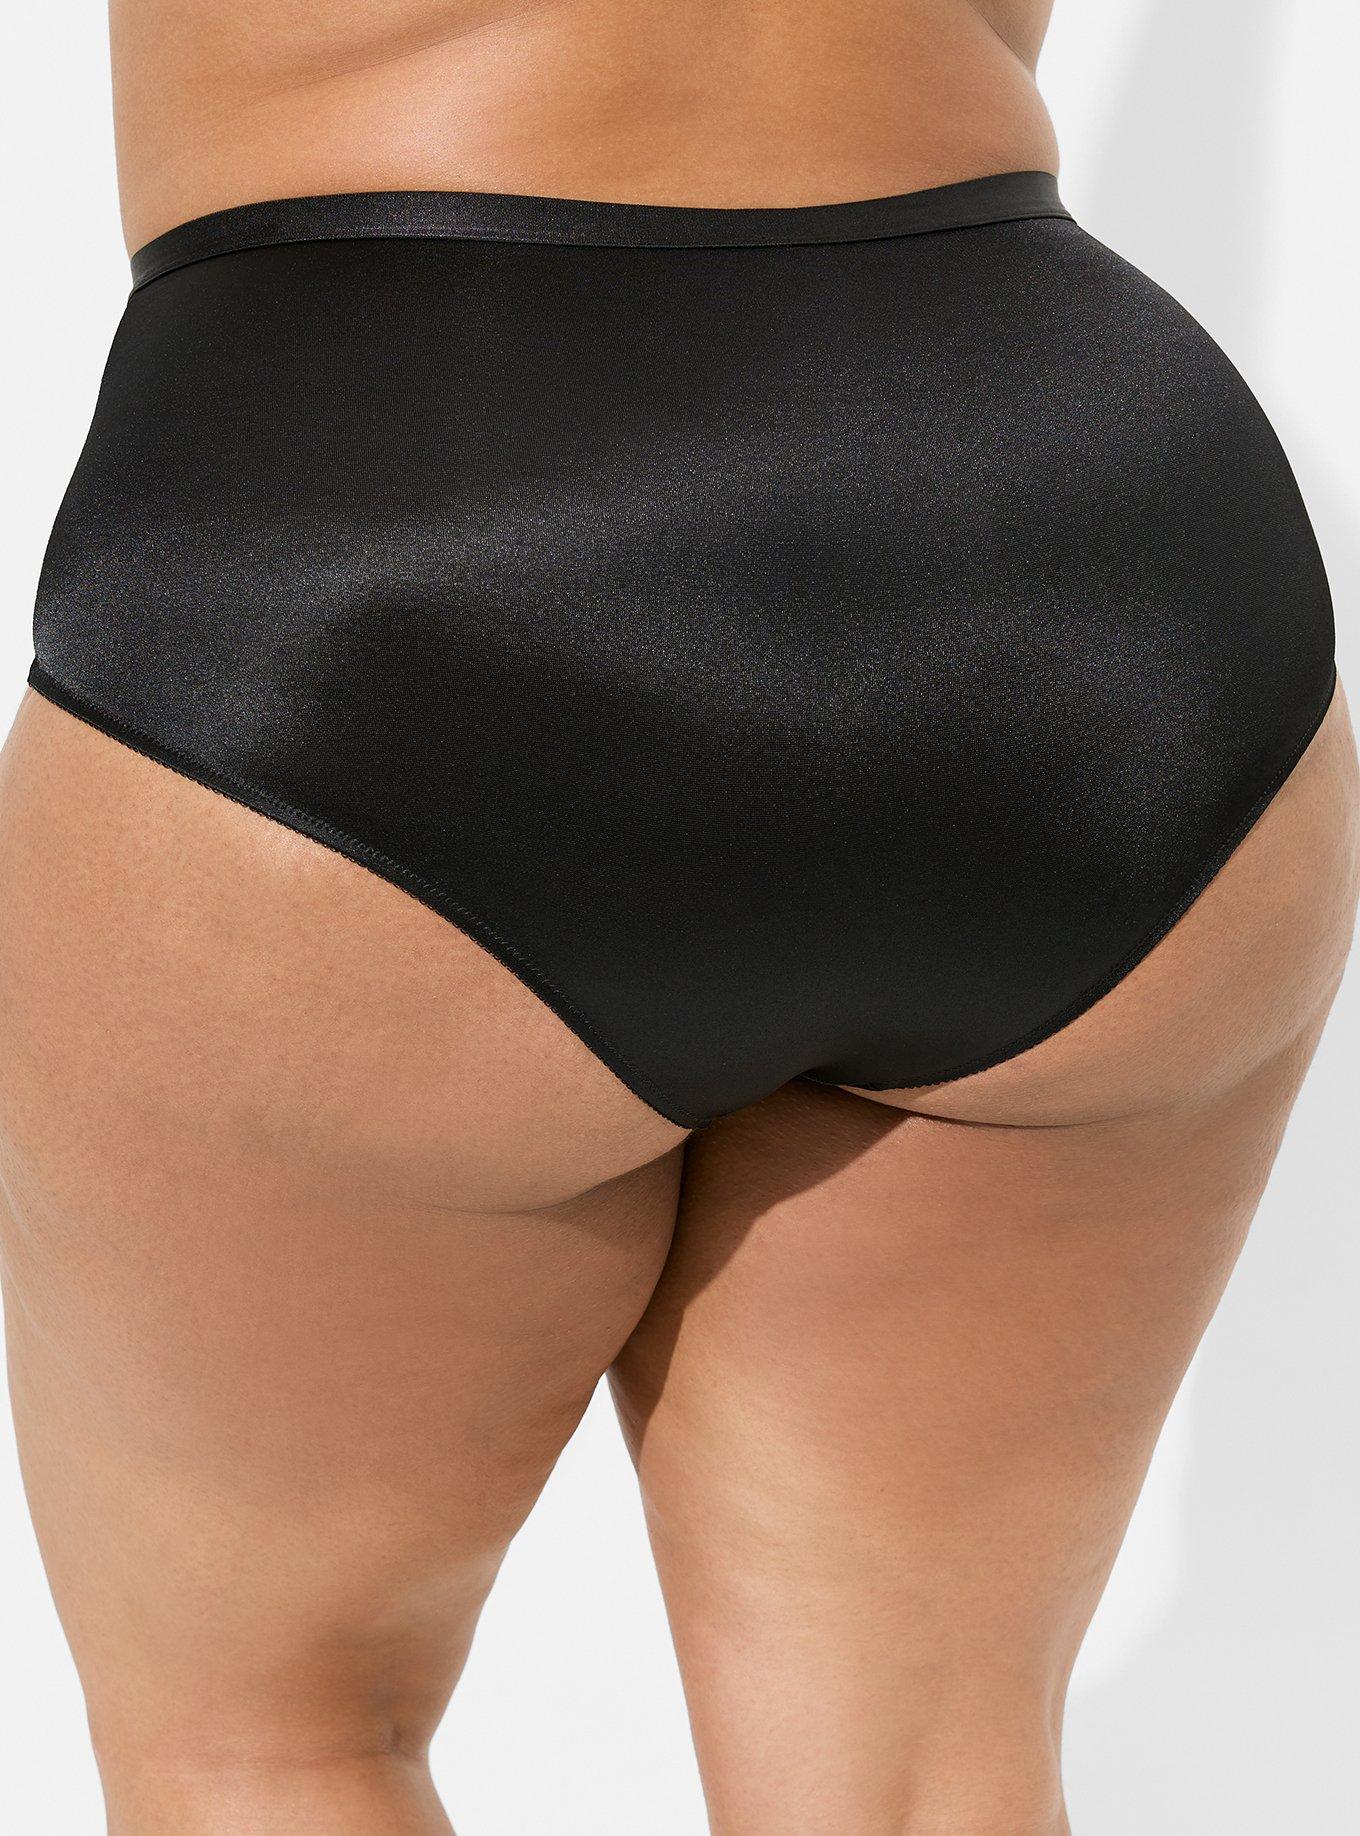 Smooth Sensation High Waist Panty in Fig Pink